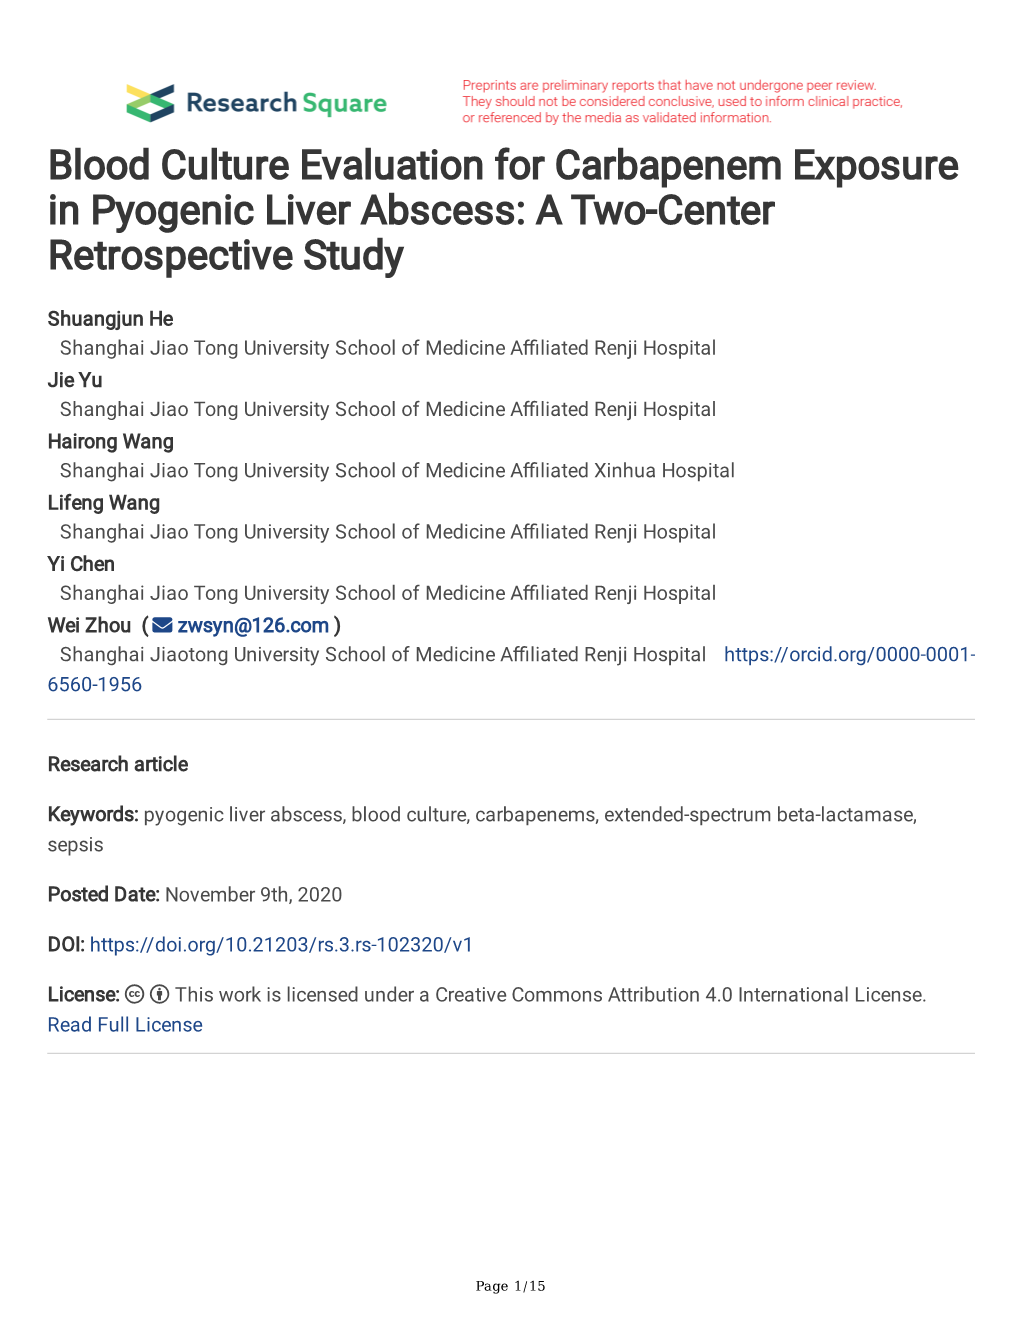 Blood Culture Evaluation for Carbapenem Exposure in Pyogenic Liver Abscess: a Two-Center Retrospective Study